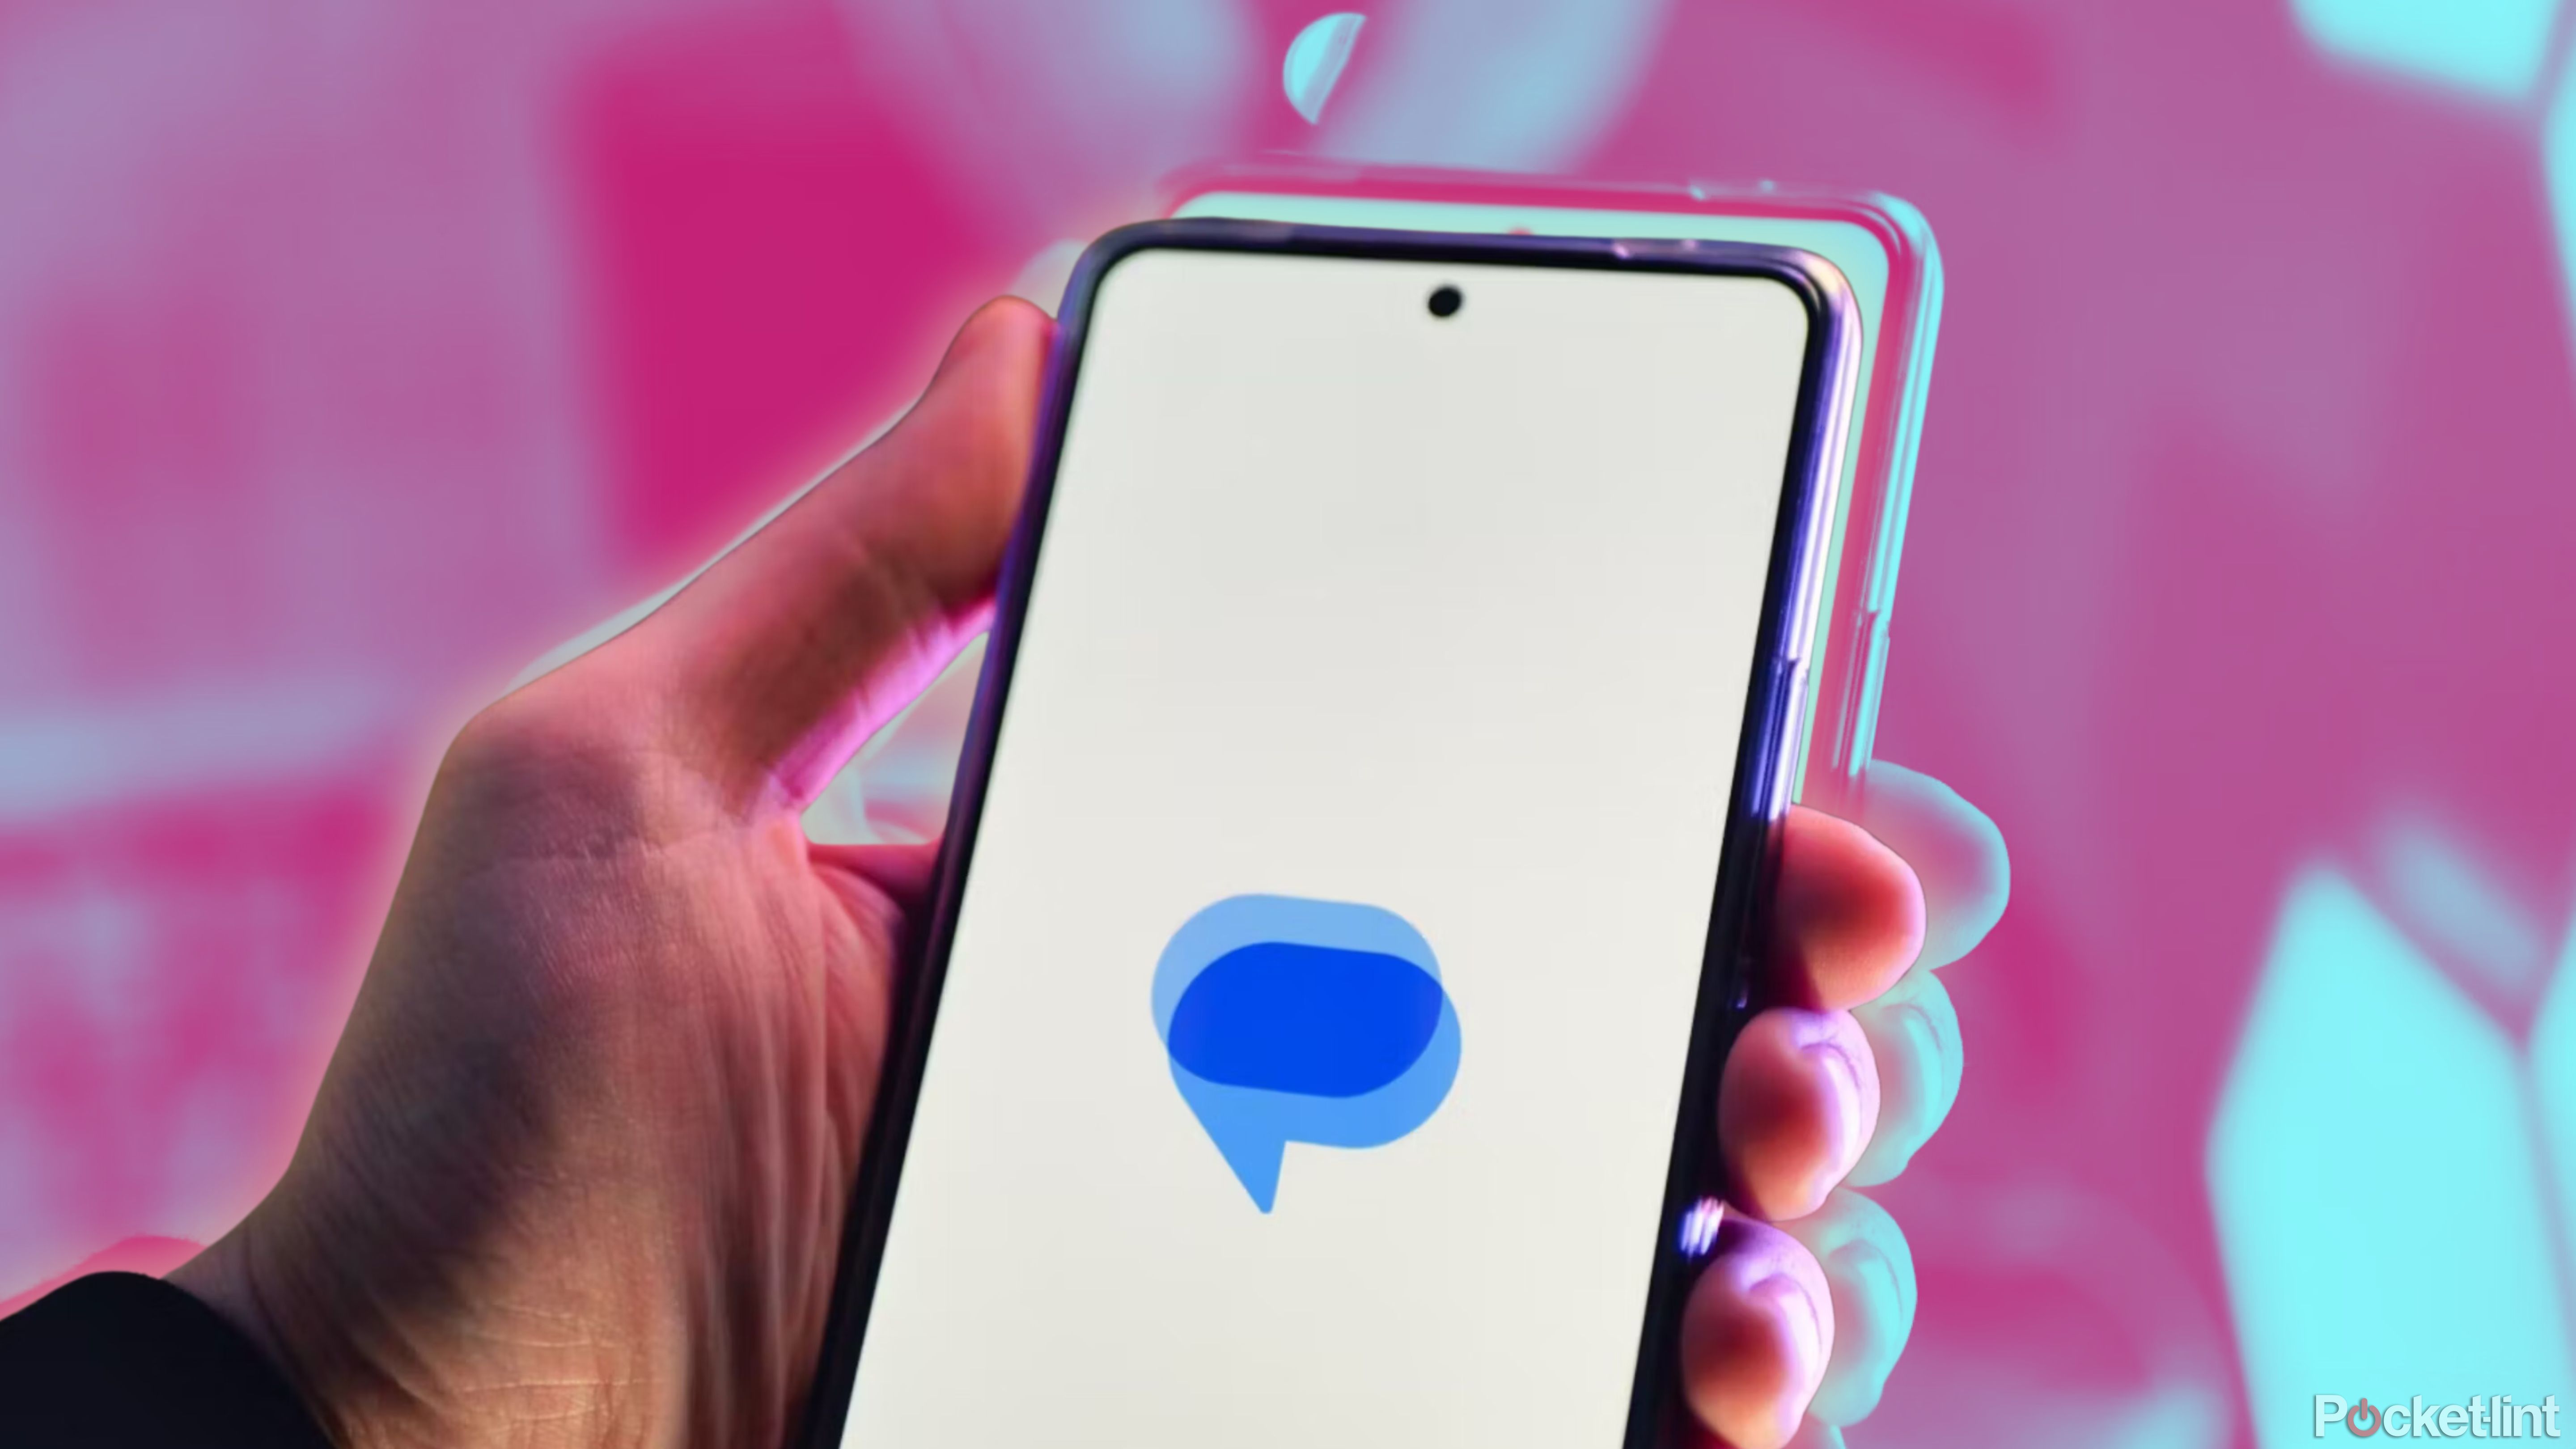 Messages icon on an Android phone against a pink background. 